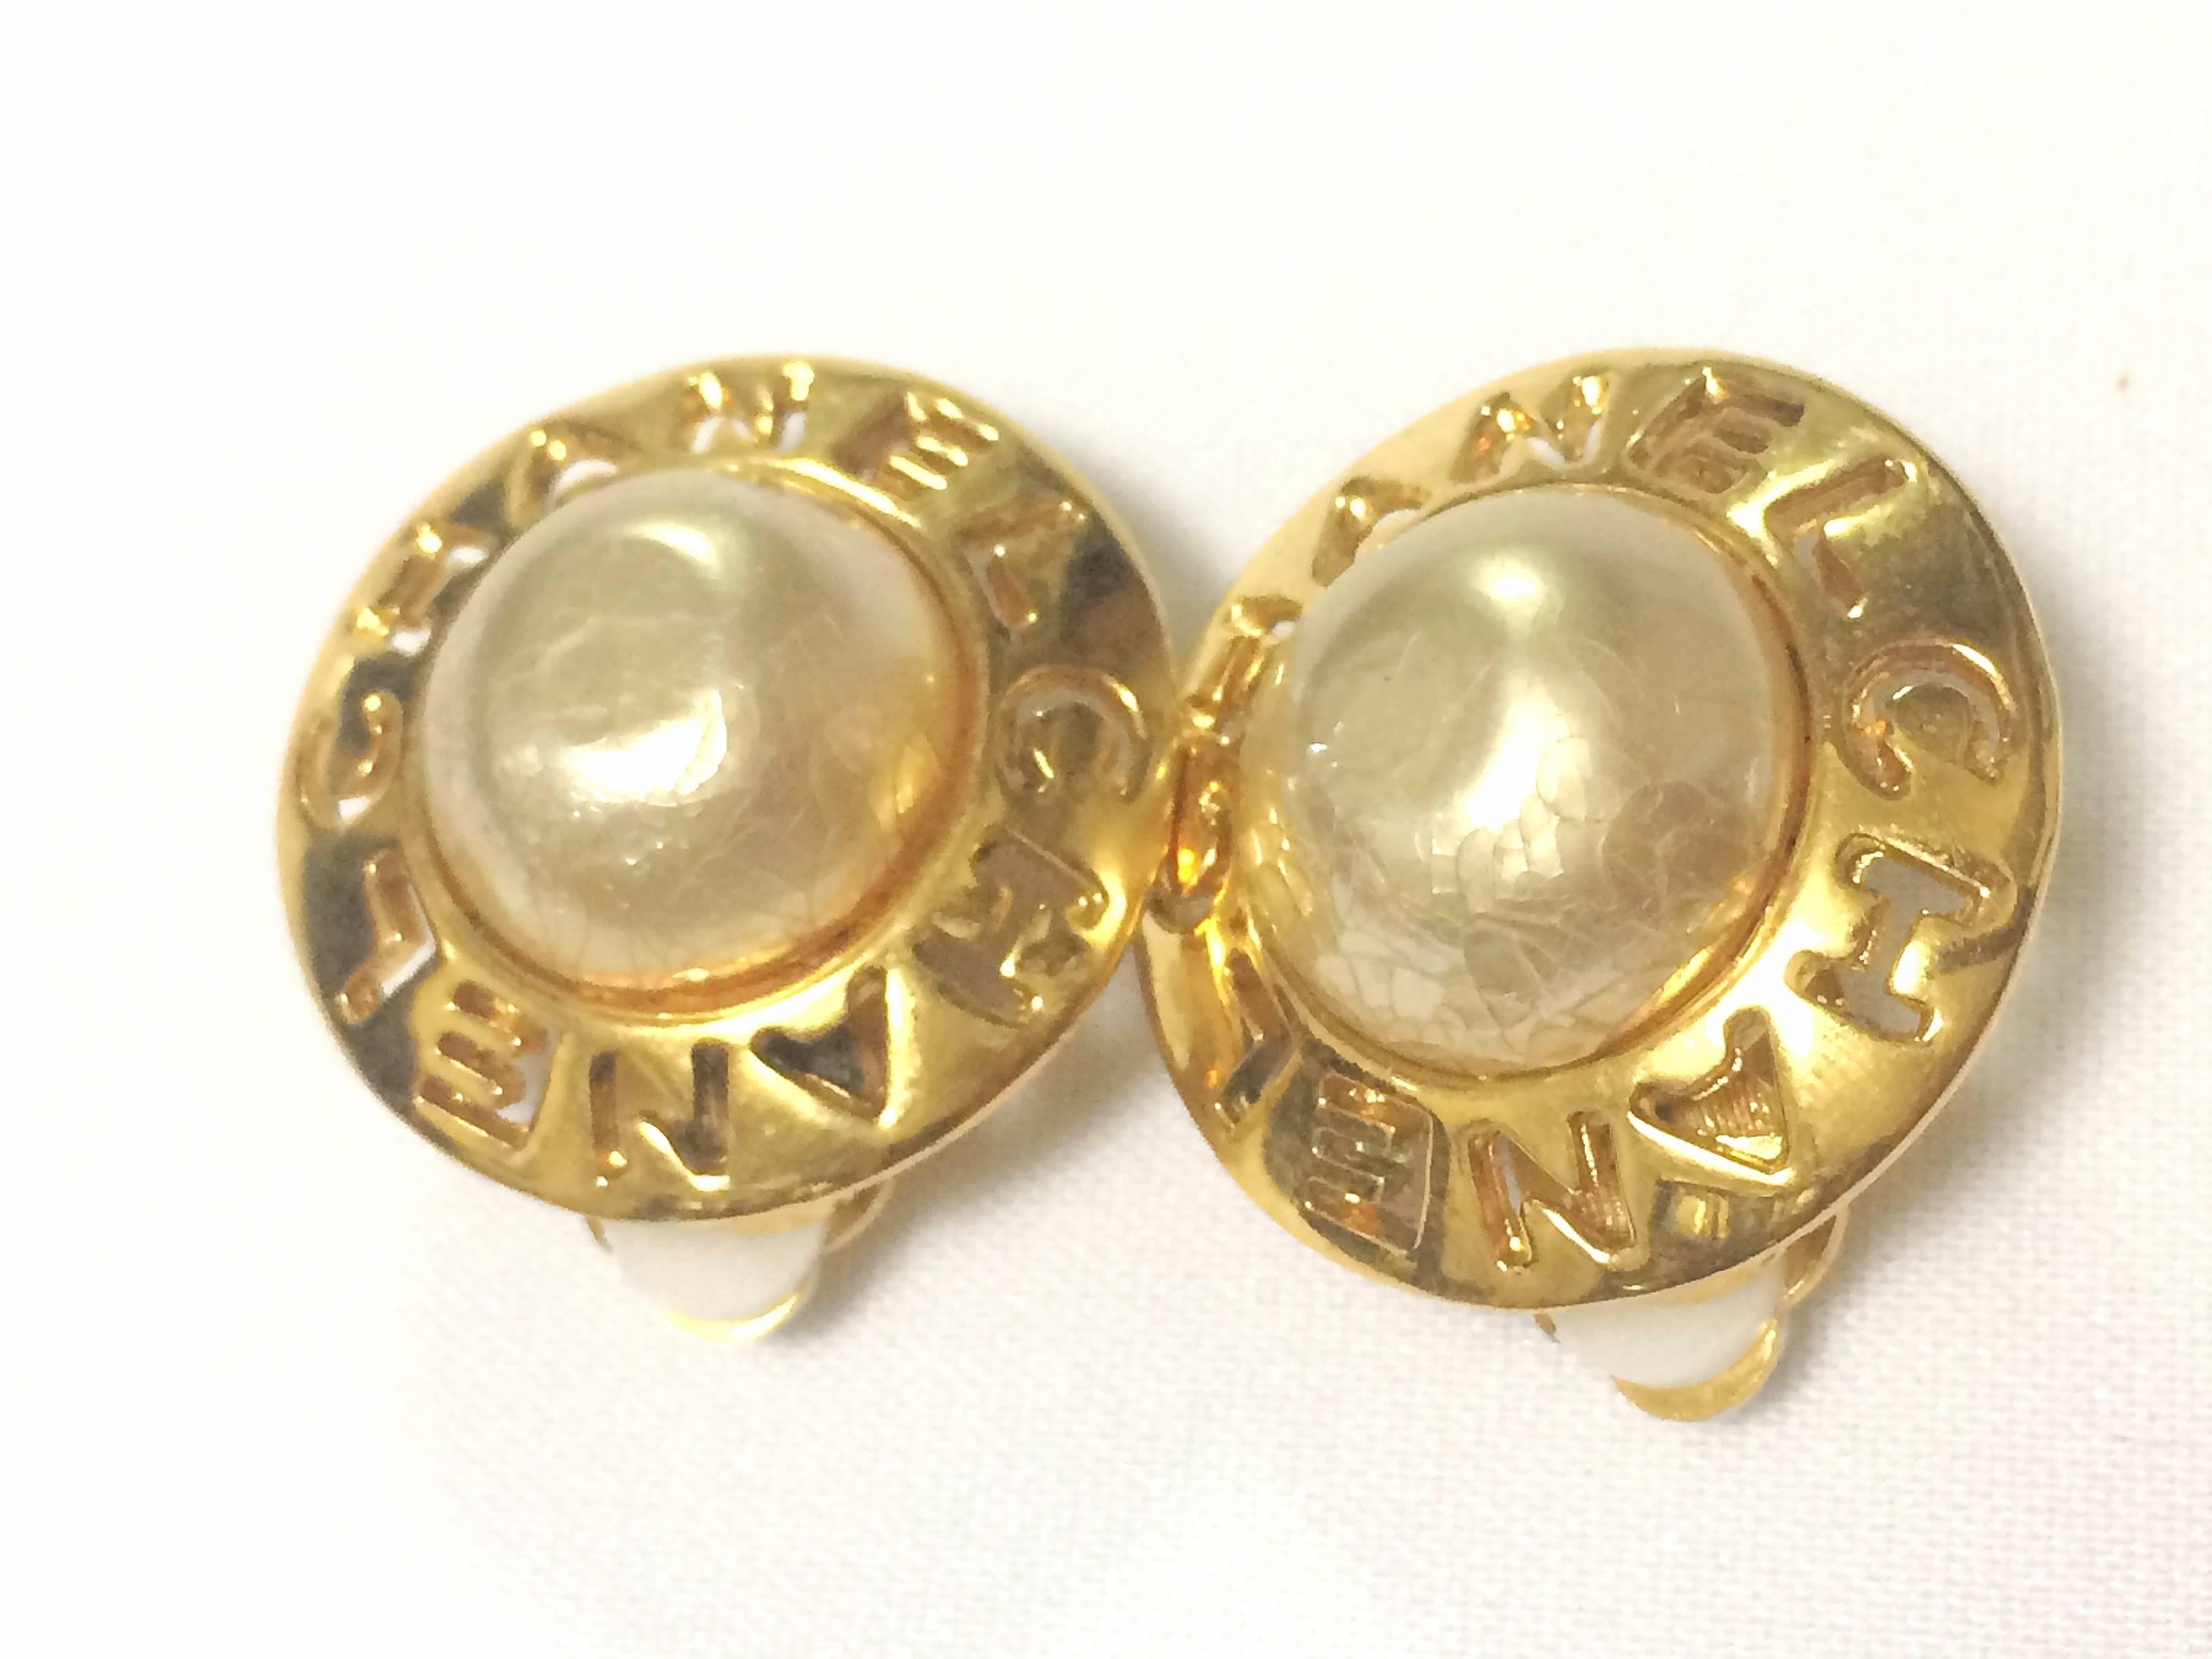 1990s. Vintage CHANEL golden round shape faux pearl earrings with cutout logo. Chic and elegant look.

Fun and Chic and Gorgeous CHANEL earrings for  you or your loved one!  
Classic round shape faux pearl and golden earrings. 
Featuring cutout